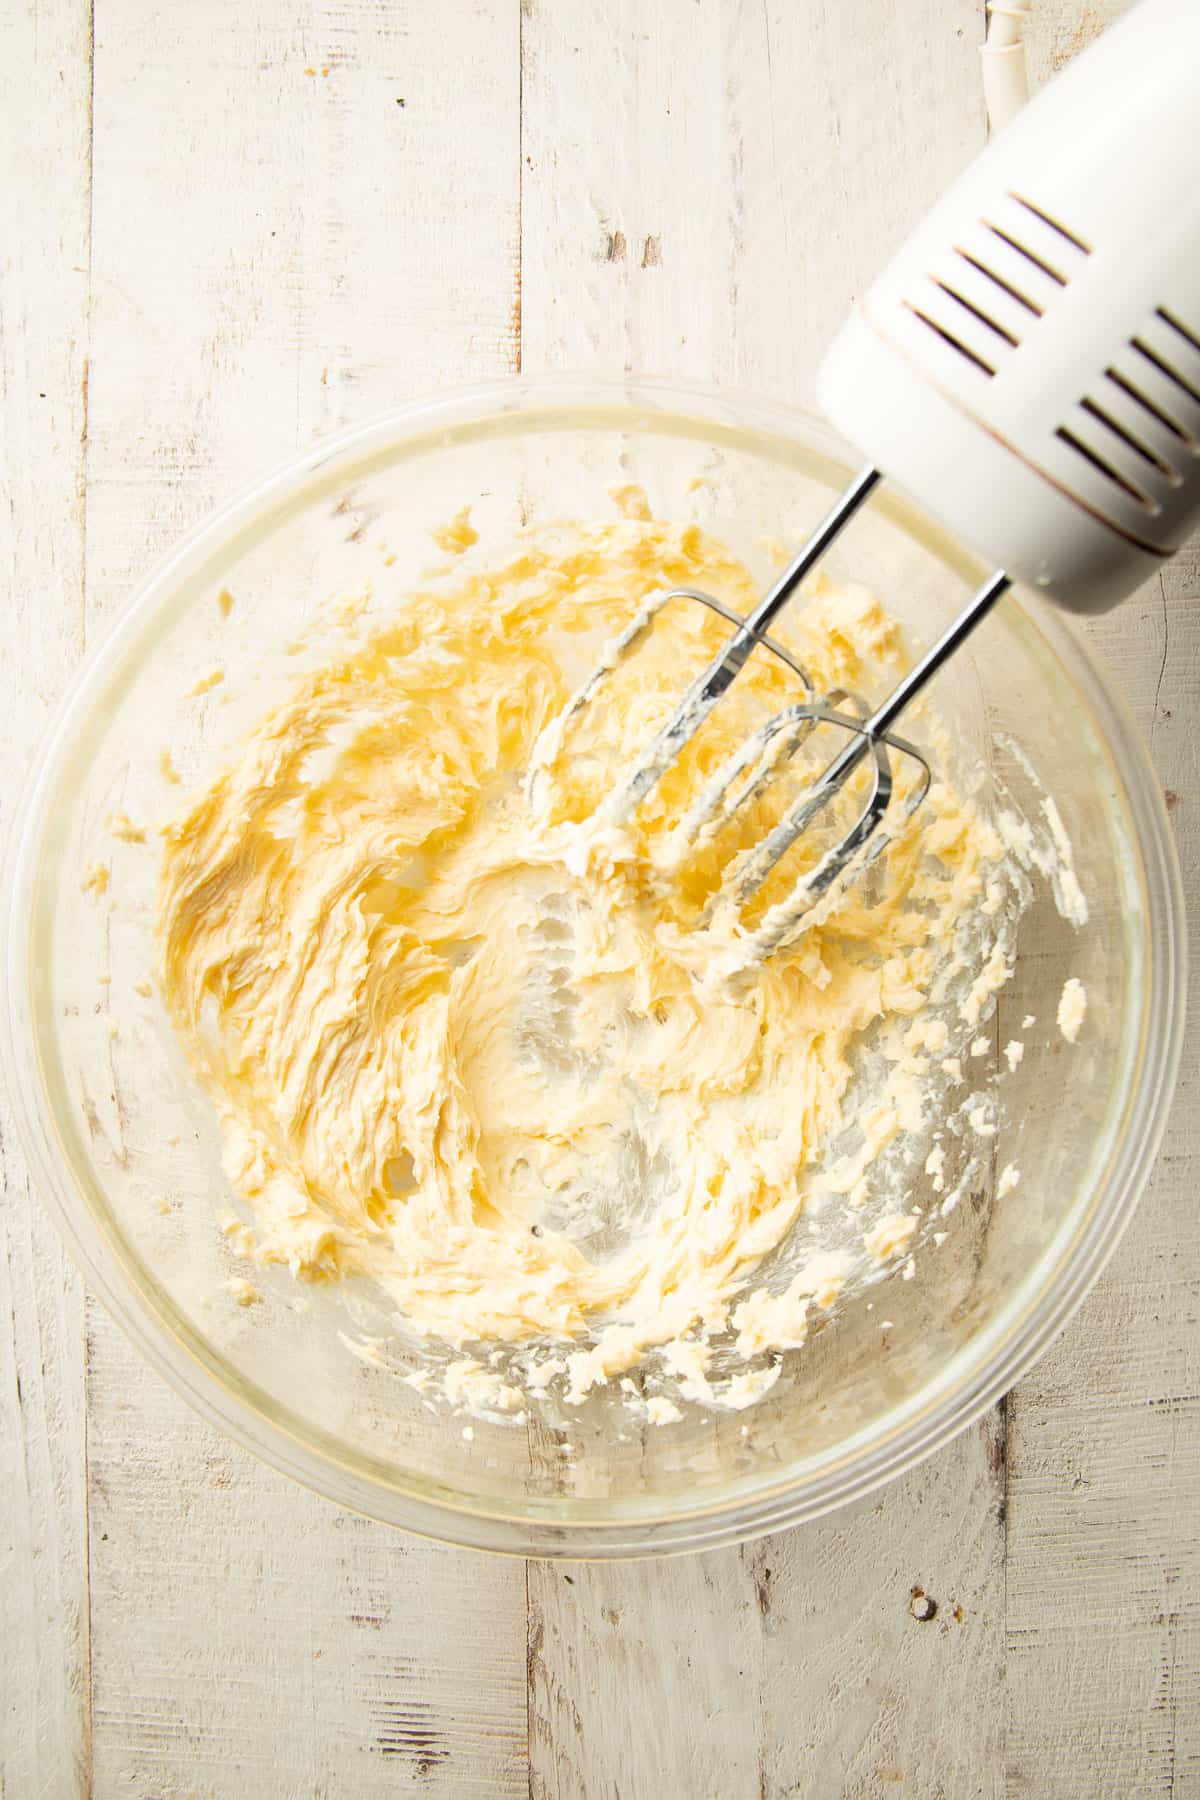 Creamed vegan butter in a mixing bowl with an electric mixer.